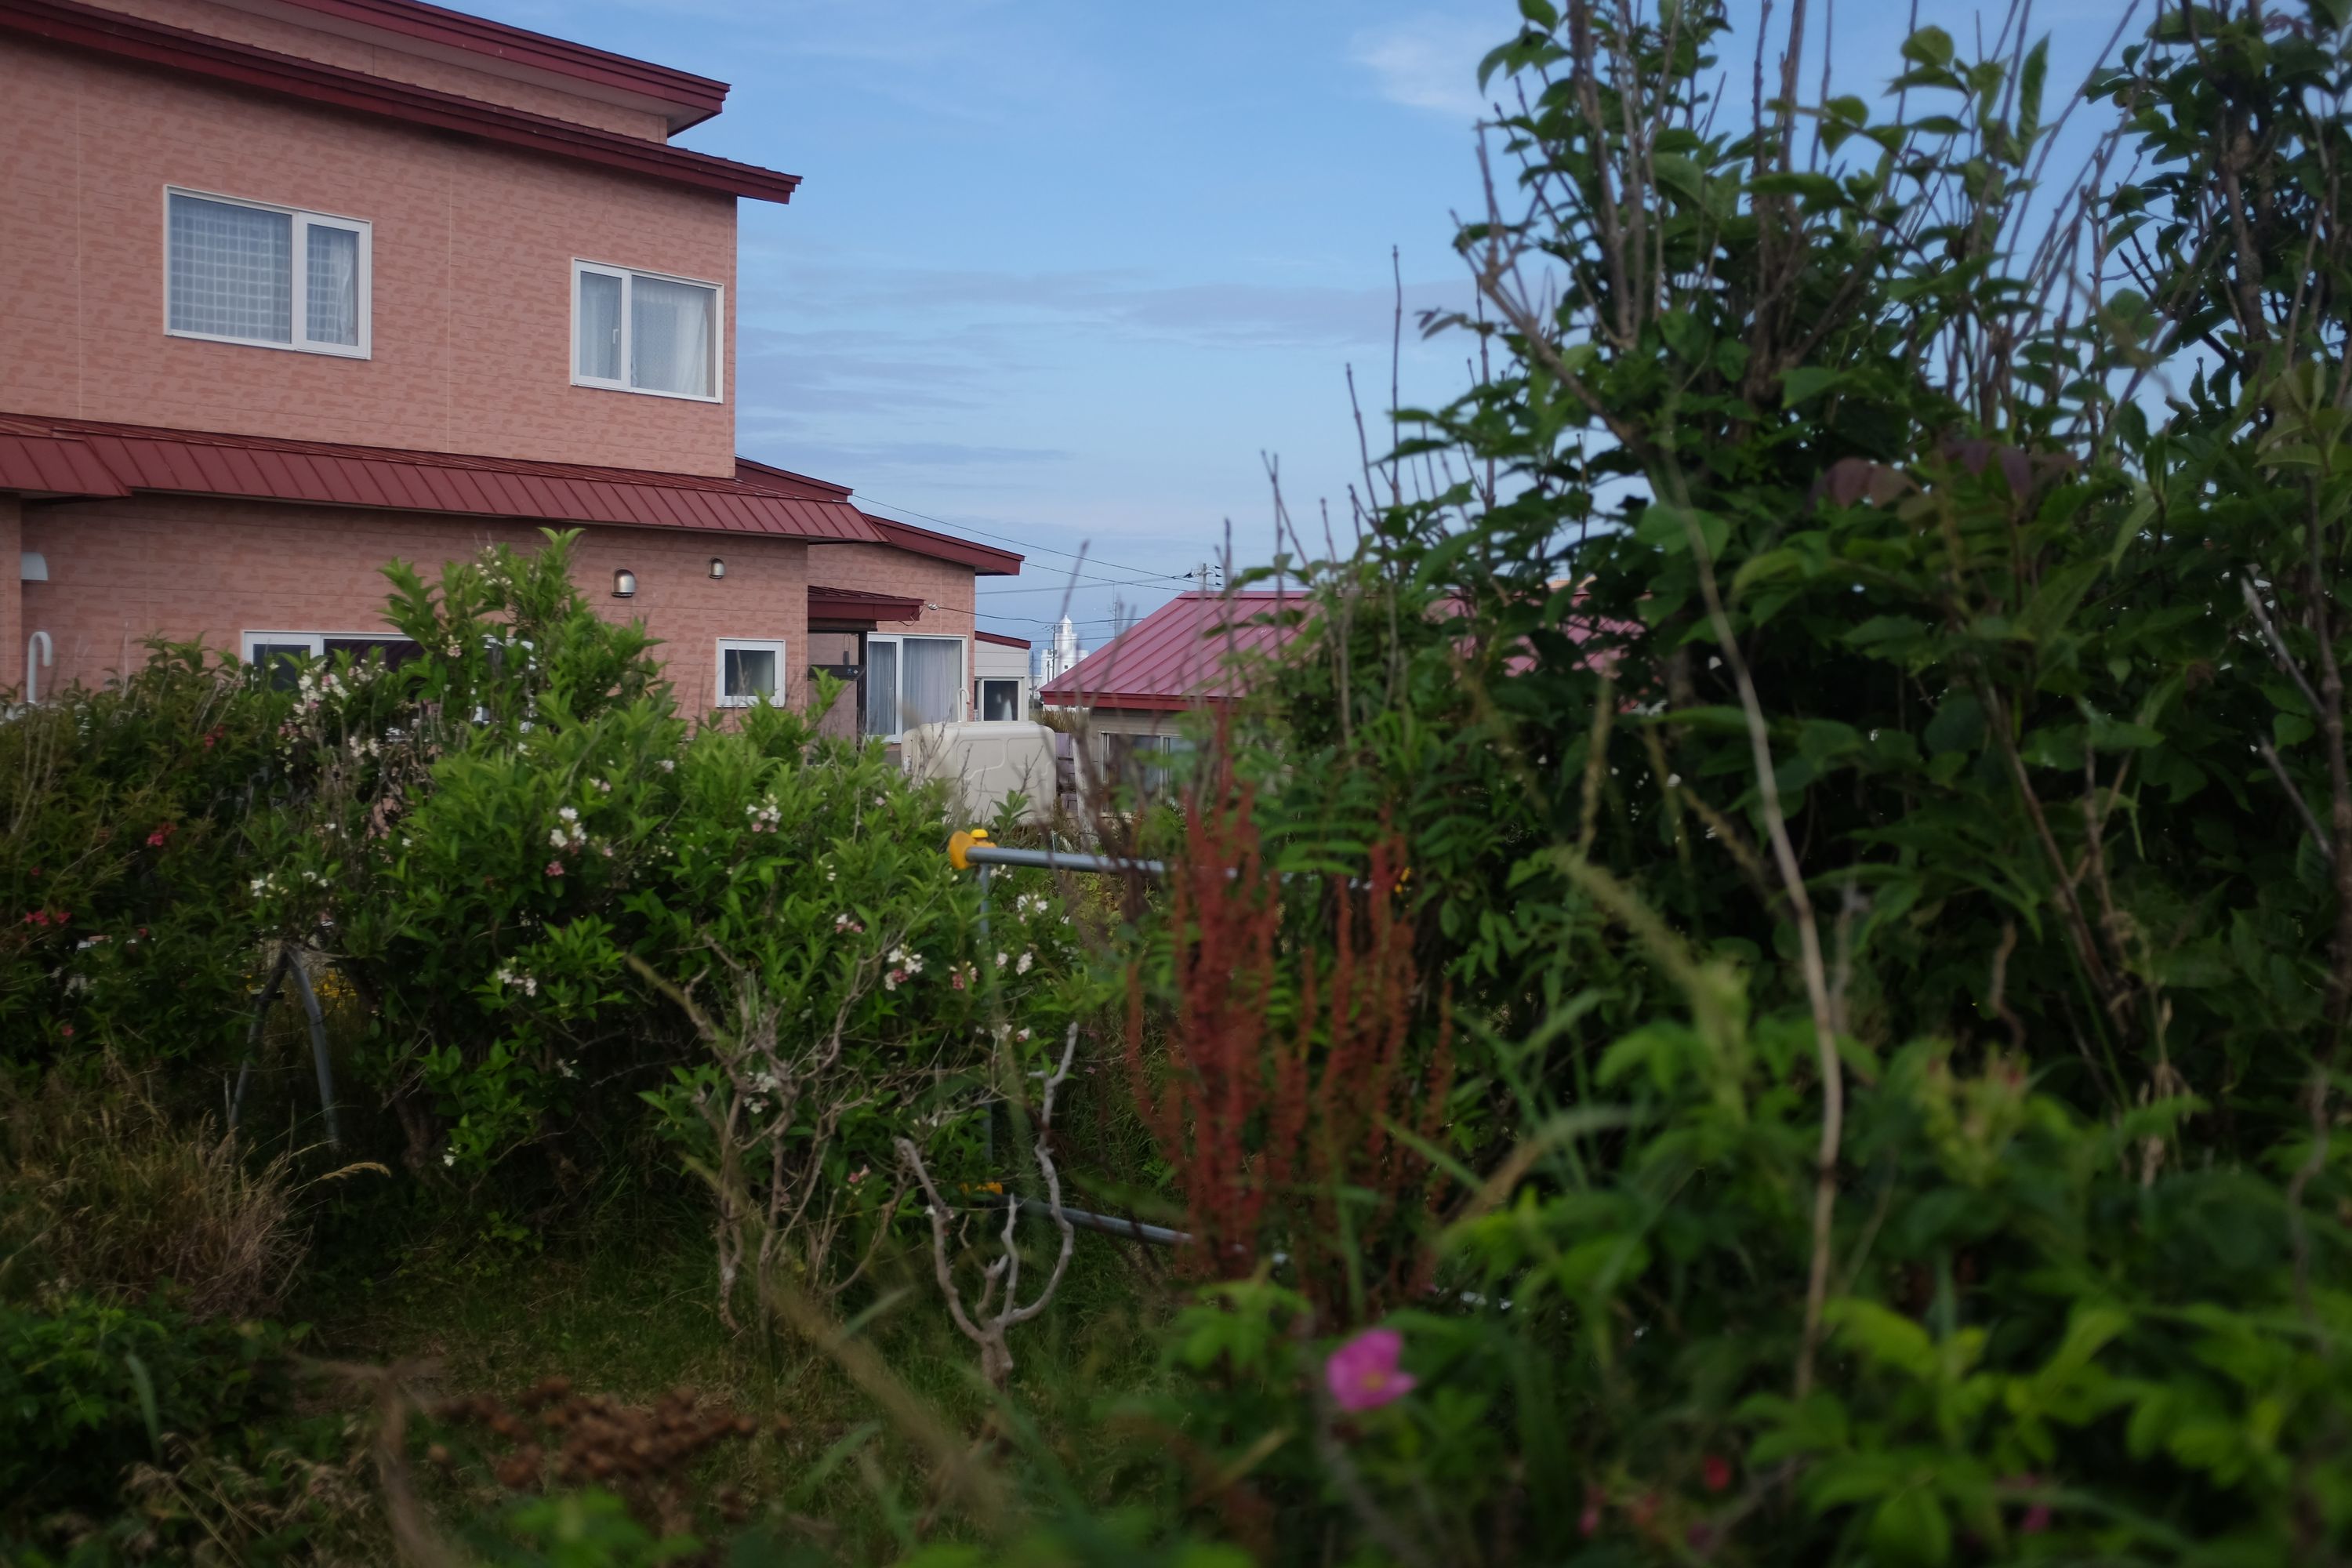 A large new pink house with a garden full of wildflowers.